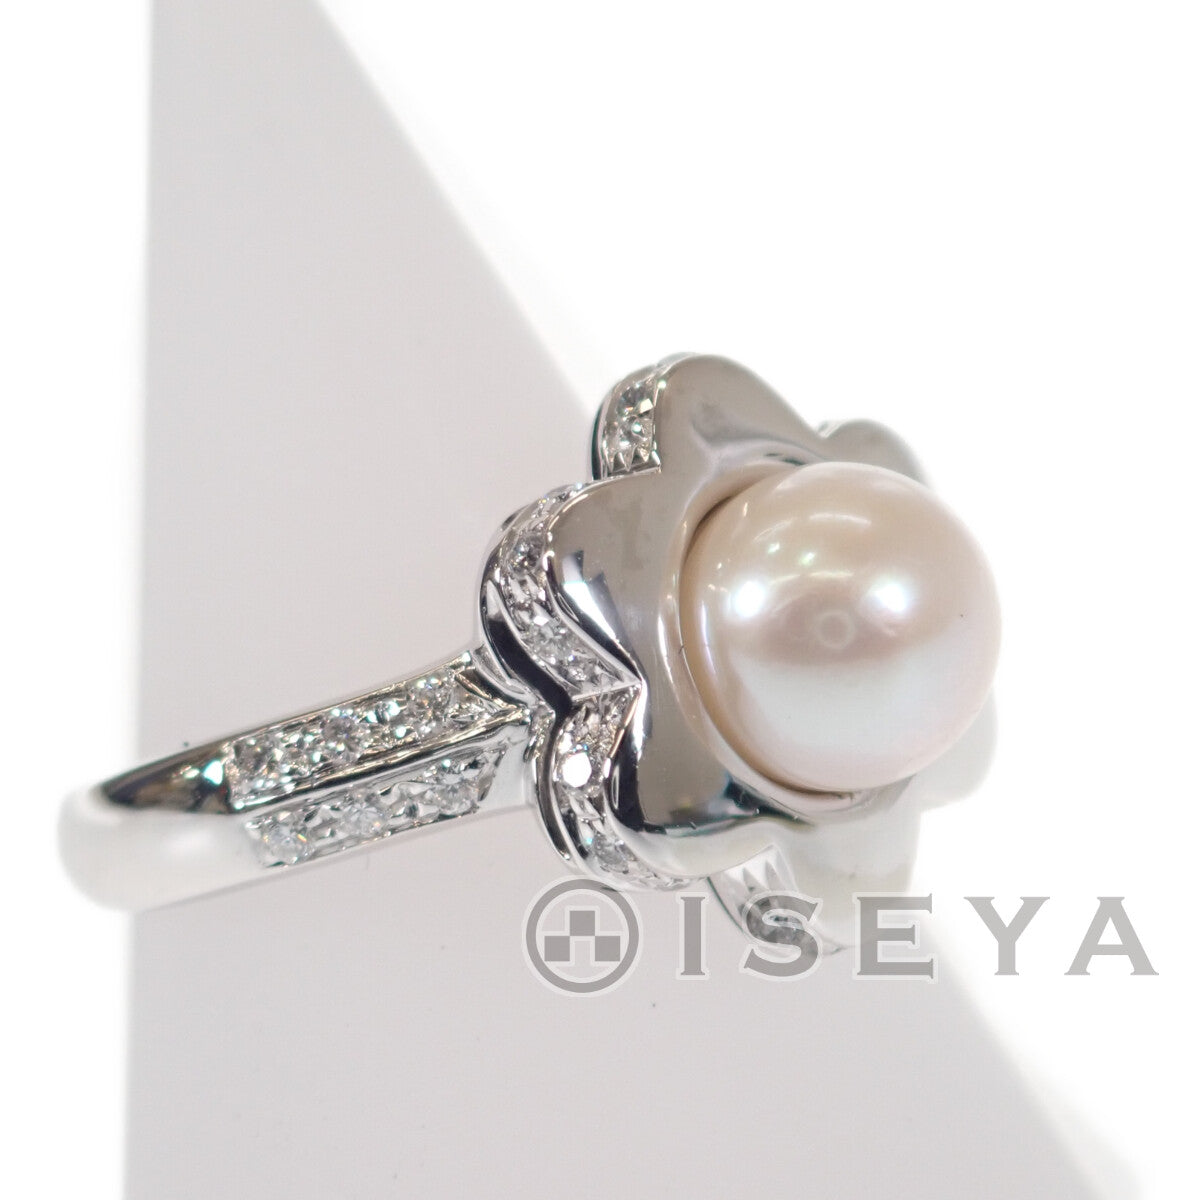 [LuxUness]  Ponte Vecchio Flower Motif Ring with Pearl & Diamond in K18 White Gold for Women, Size 9 (Used) in Excellent condition